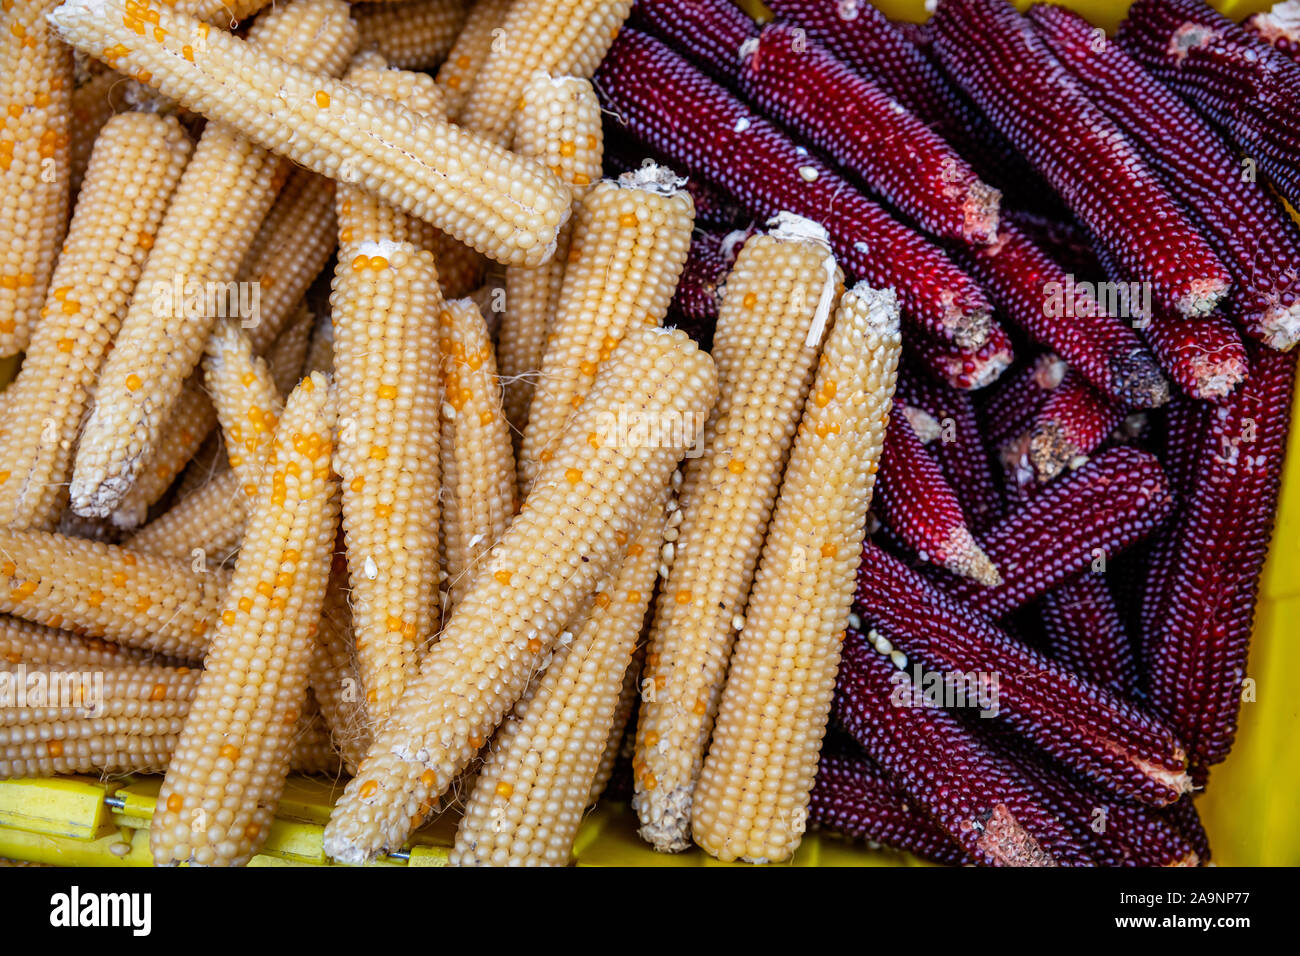 Flint corn yellow and ruby color for sale at an open air farmers market stall, full background, closeup top view Stock Photo